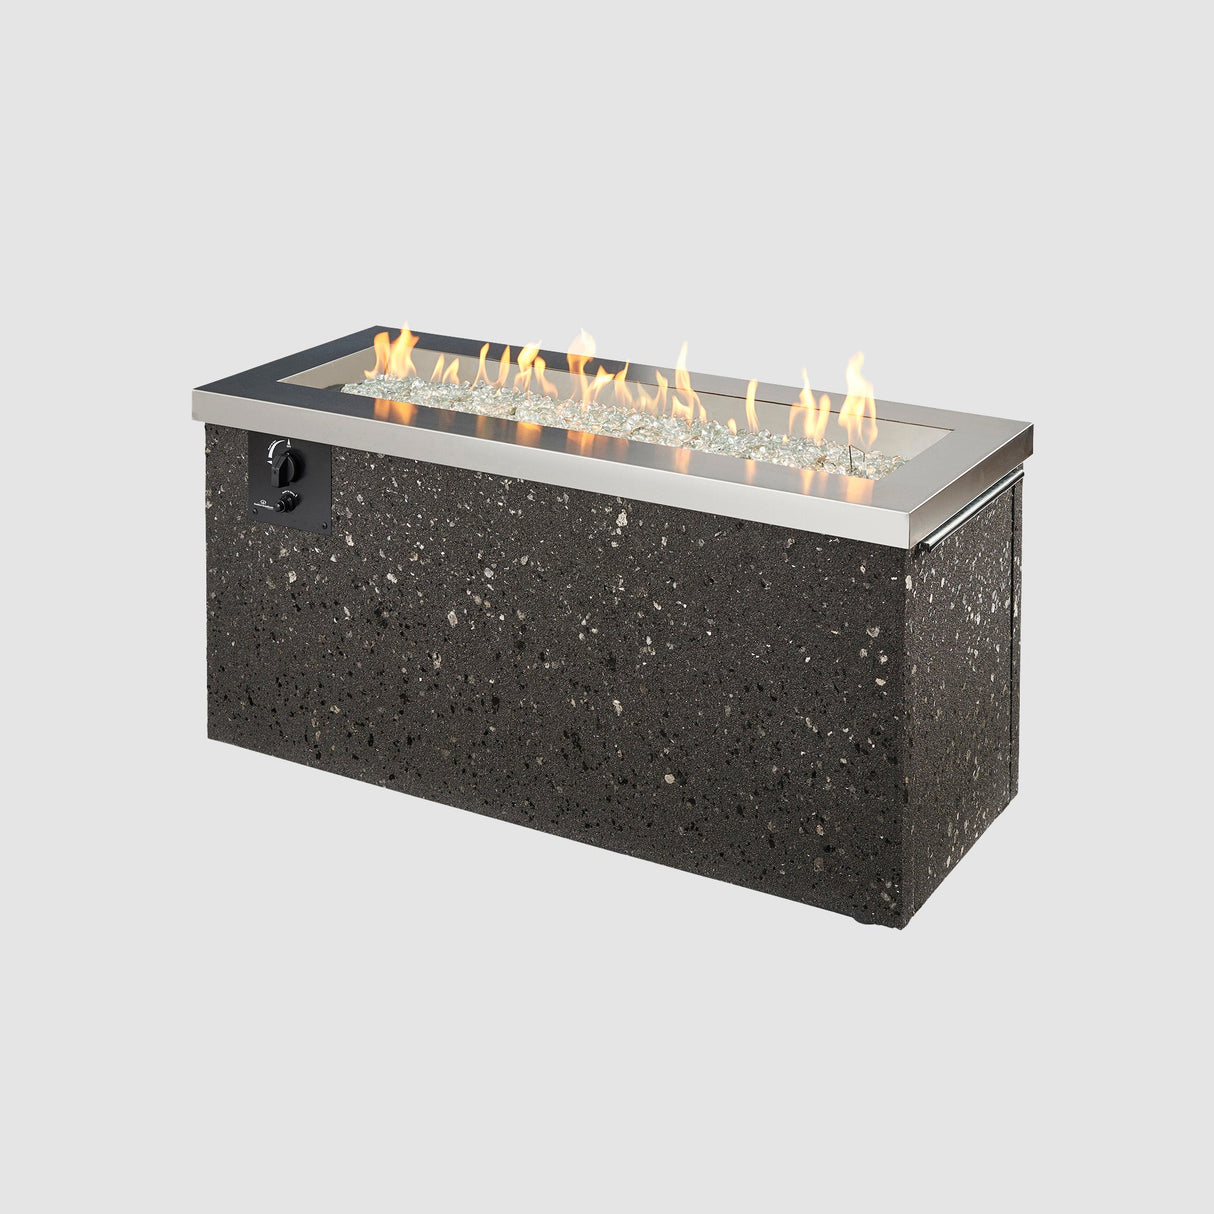 Stainless Steel Key Largo Linear Gas Fire Pit Table on a grey background